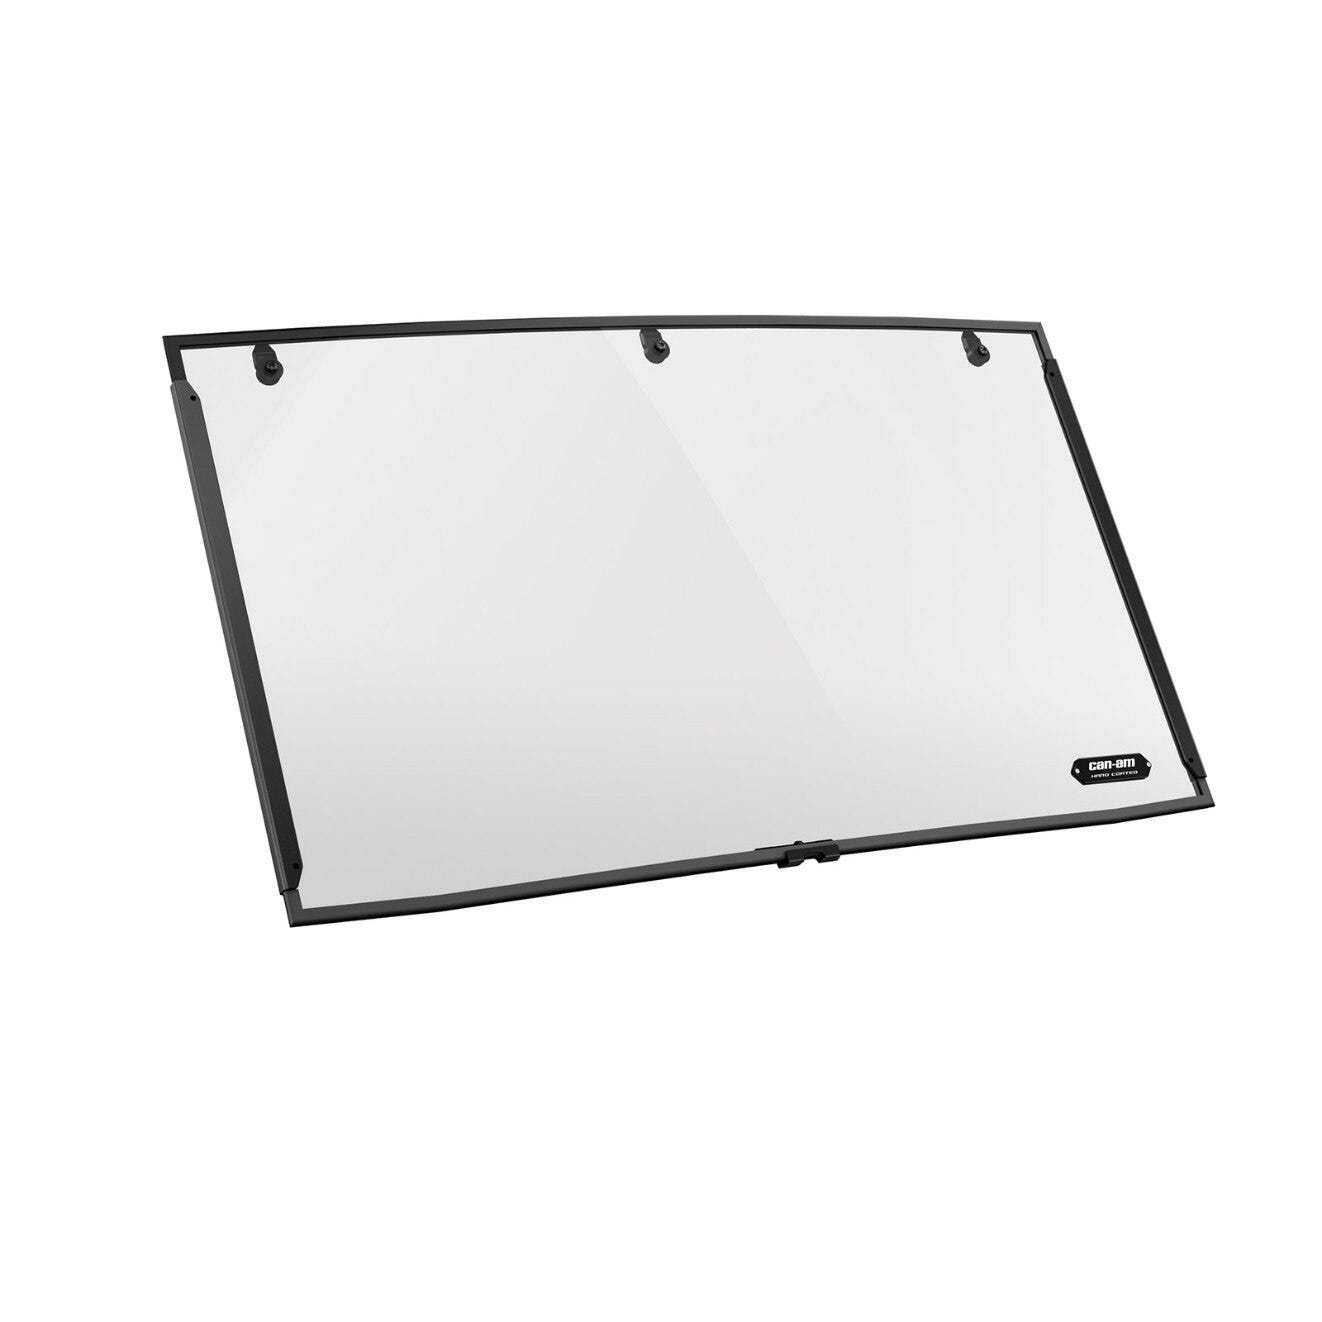 Can-am Full Windshield - Hardcoated 715002432 - The Parts Lodge